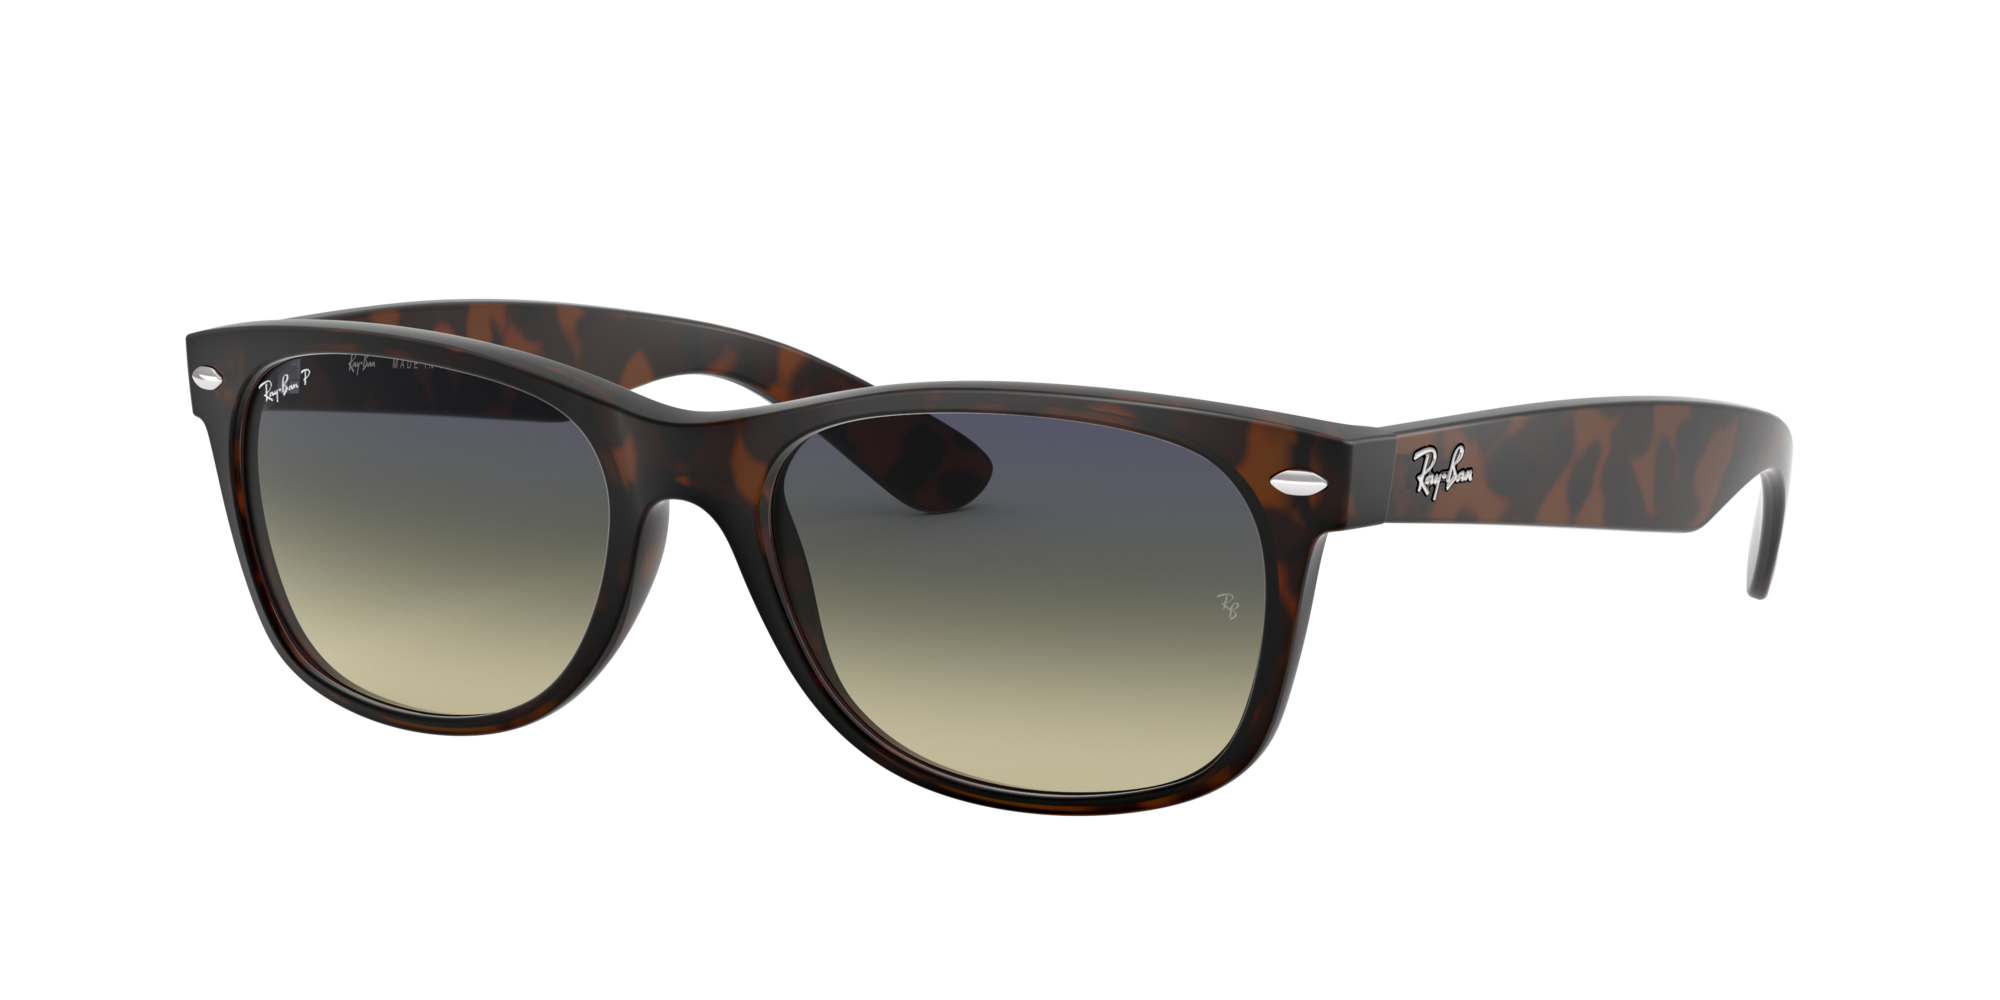 ray ban glasses tortoise and blue